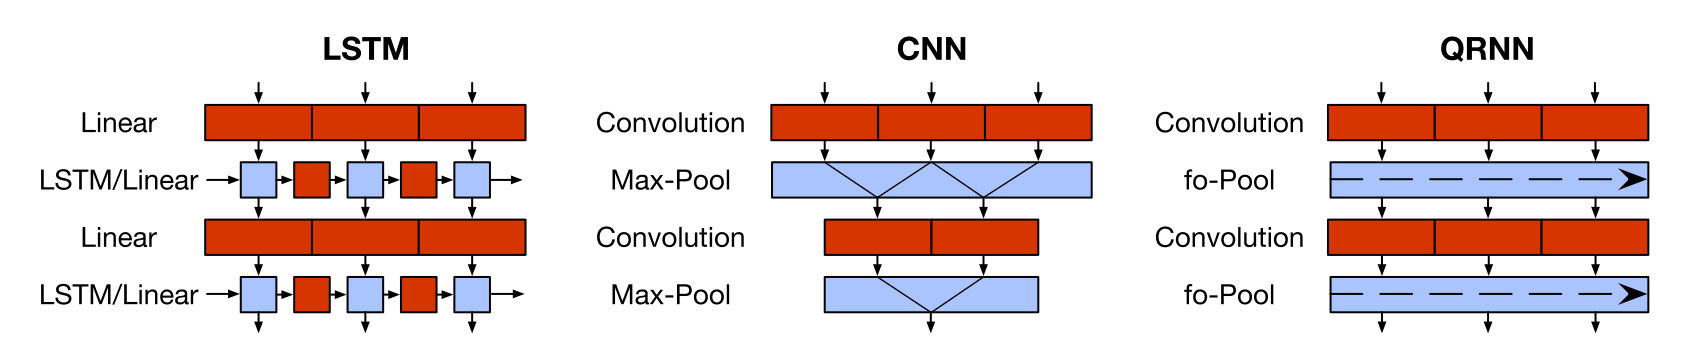 The computation structure of the QRNN compared with an LSTM and a CNN (Bradbury et al., 2019)